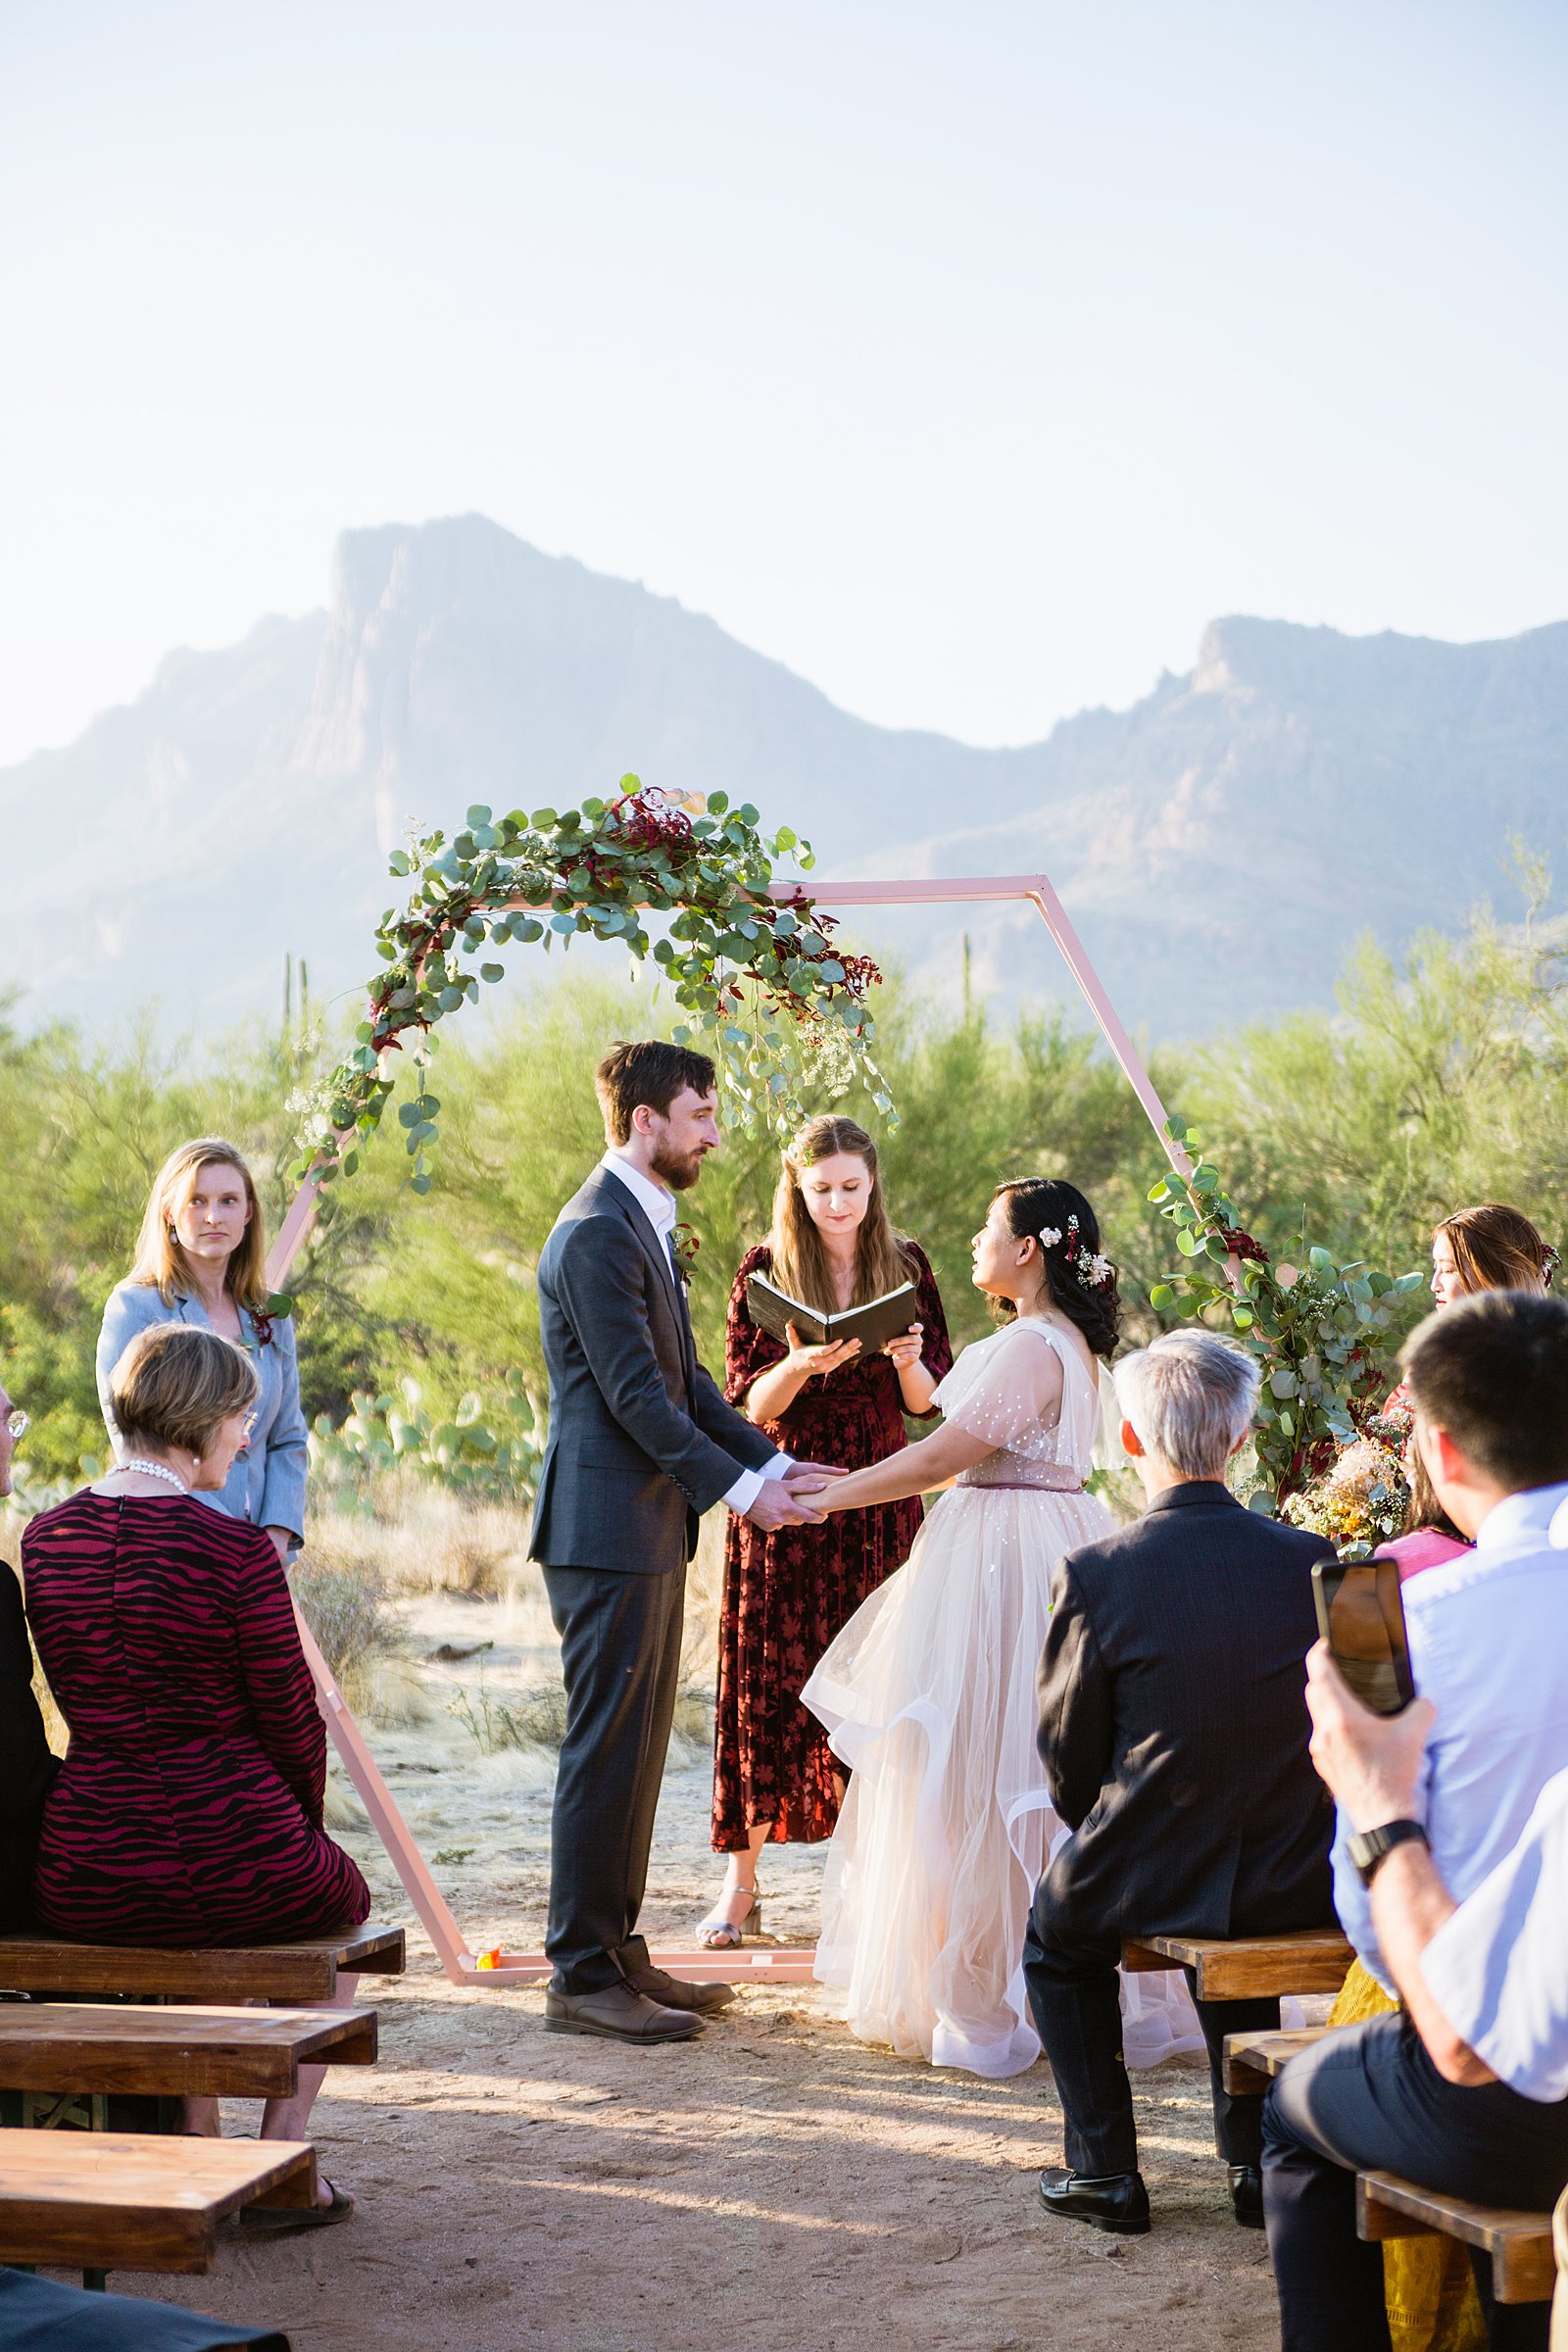 Wedding ceremony at a Cloth and Flame wedding in the Superstition Mountains by Phoenix wedding photographer PMA Photography.